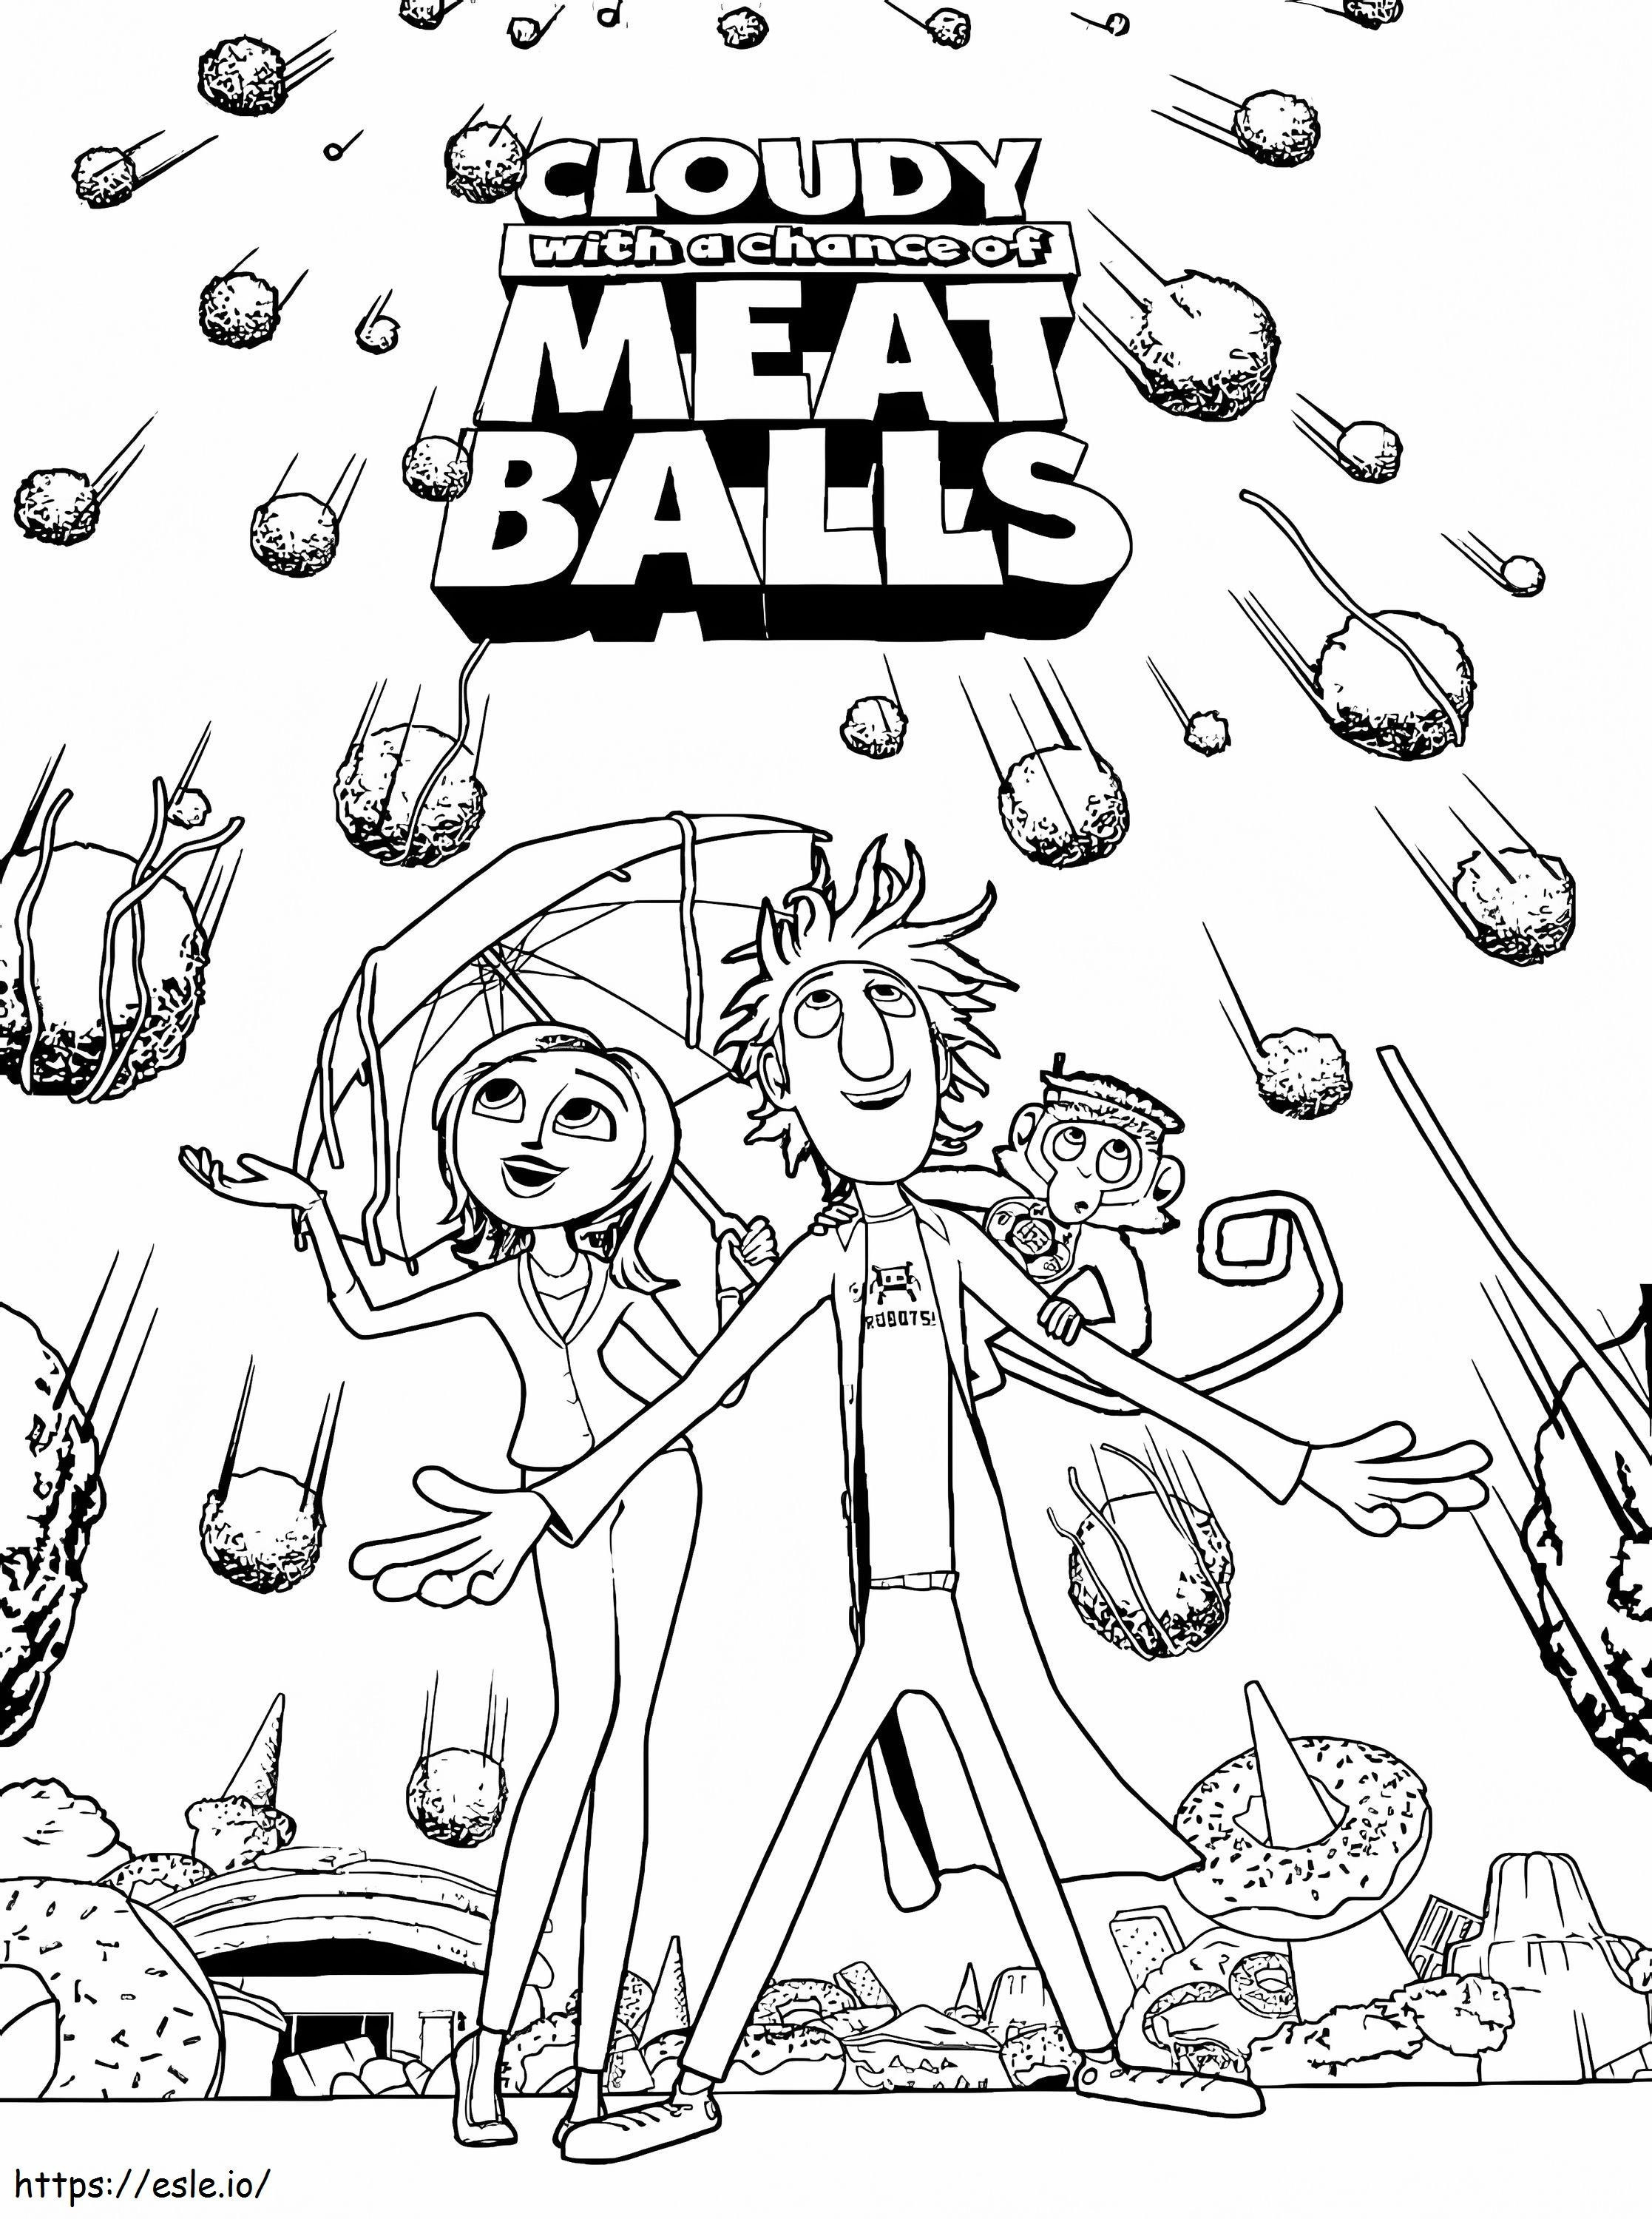 Cloudy With A Chance Of Meatballs 19 coloring page